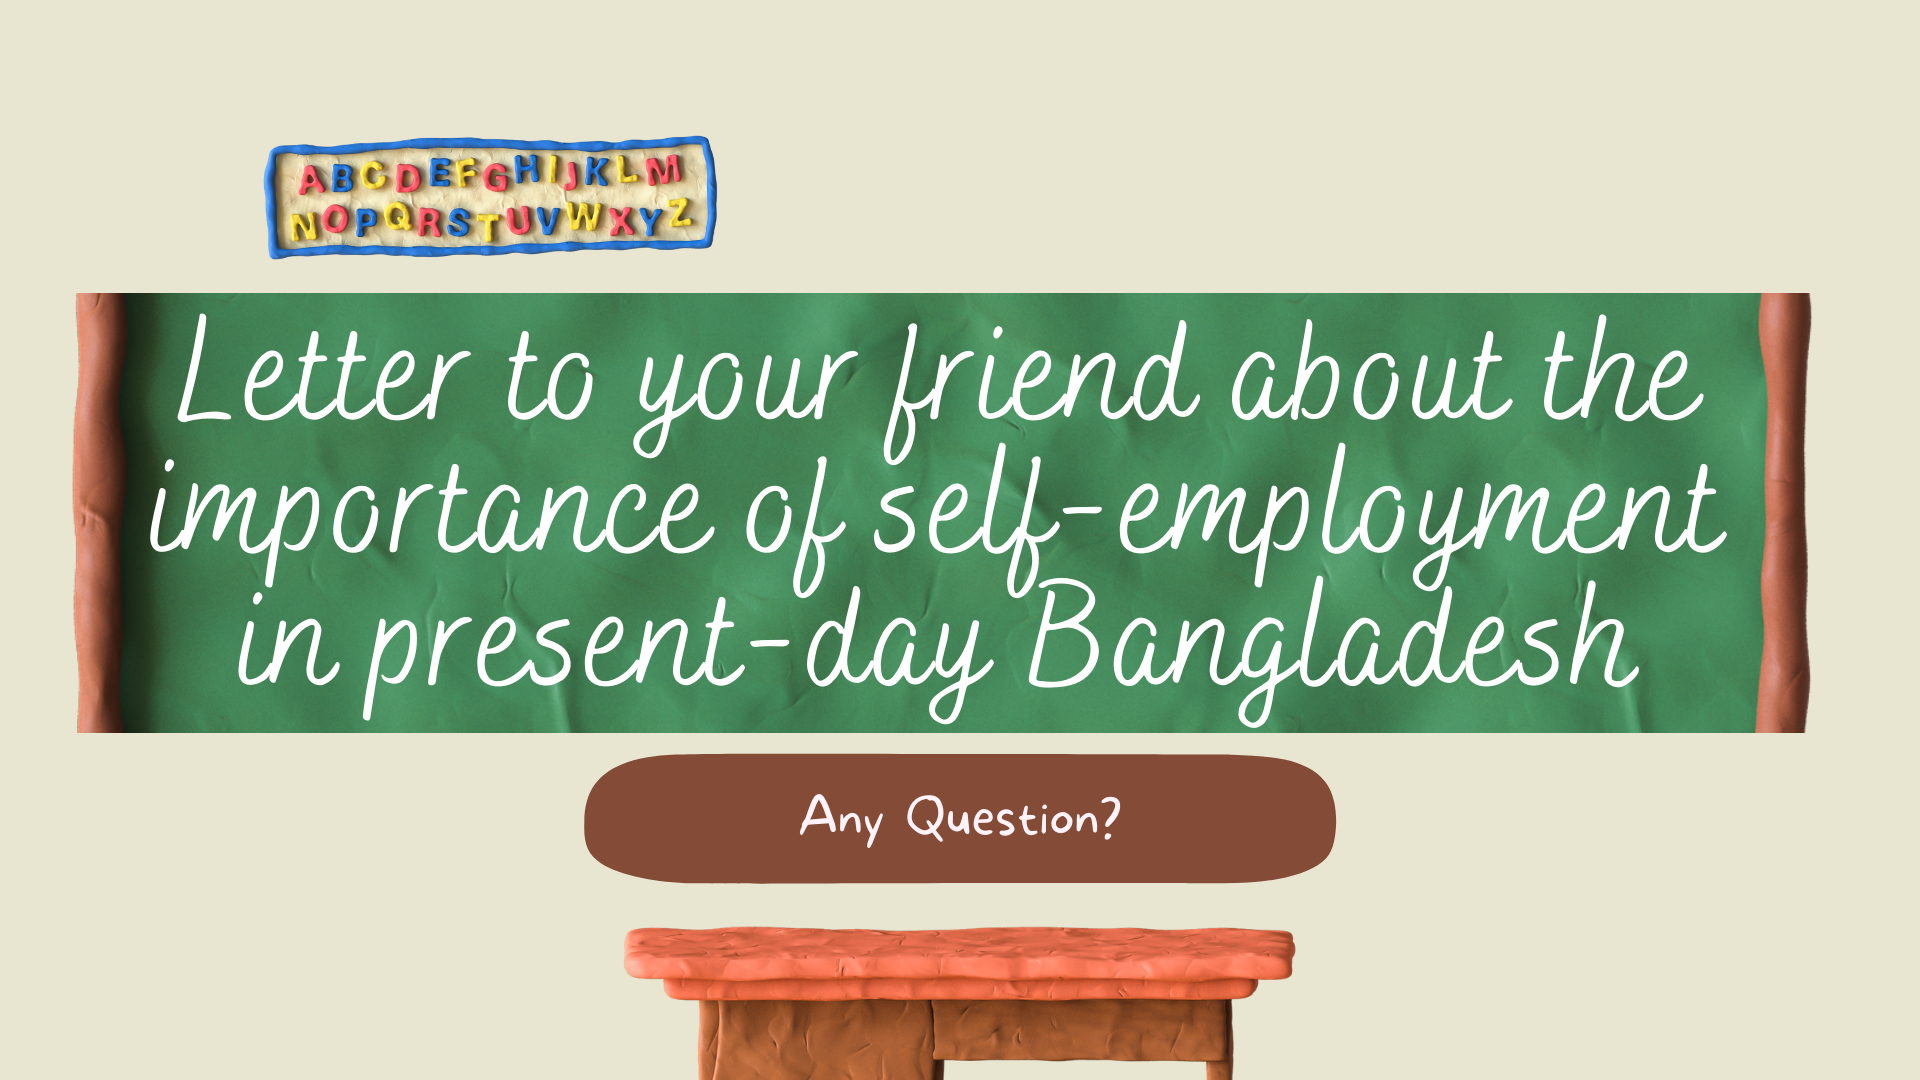 Letter to your friend about the importance of self-employment in present-day Bangladesh